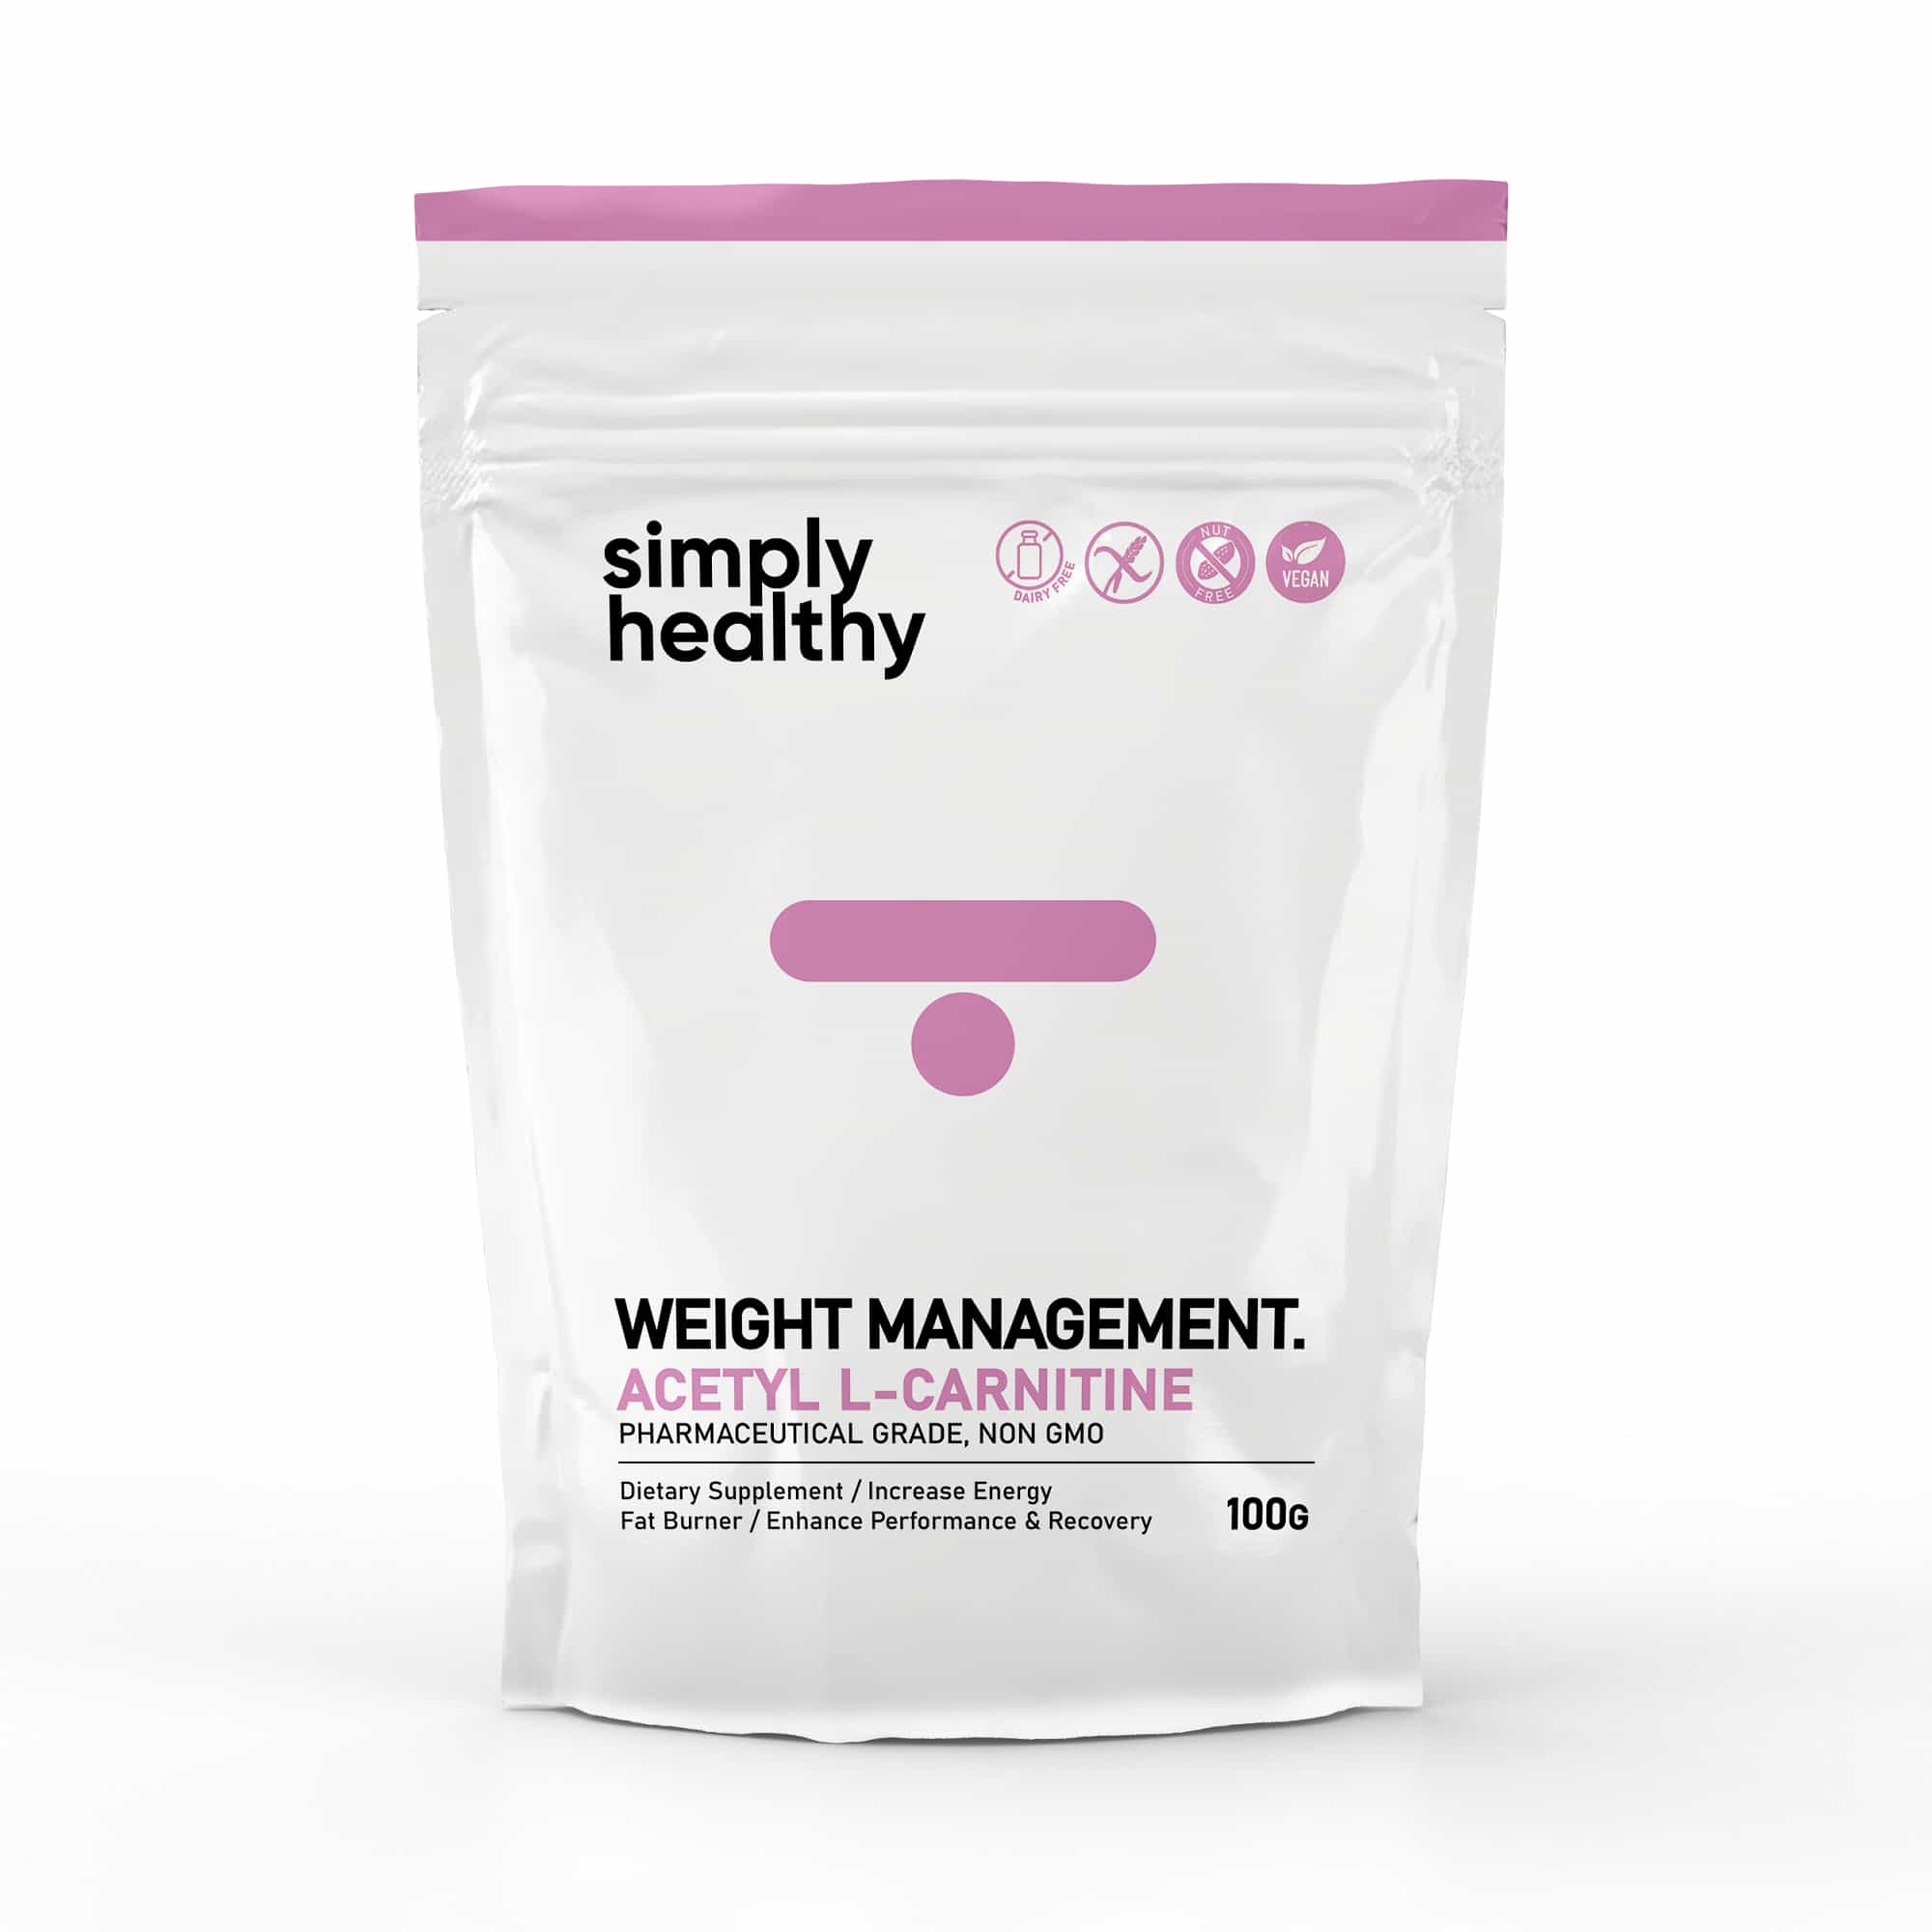 Acetyl Carnitine - 100g by Simply Healthy